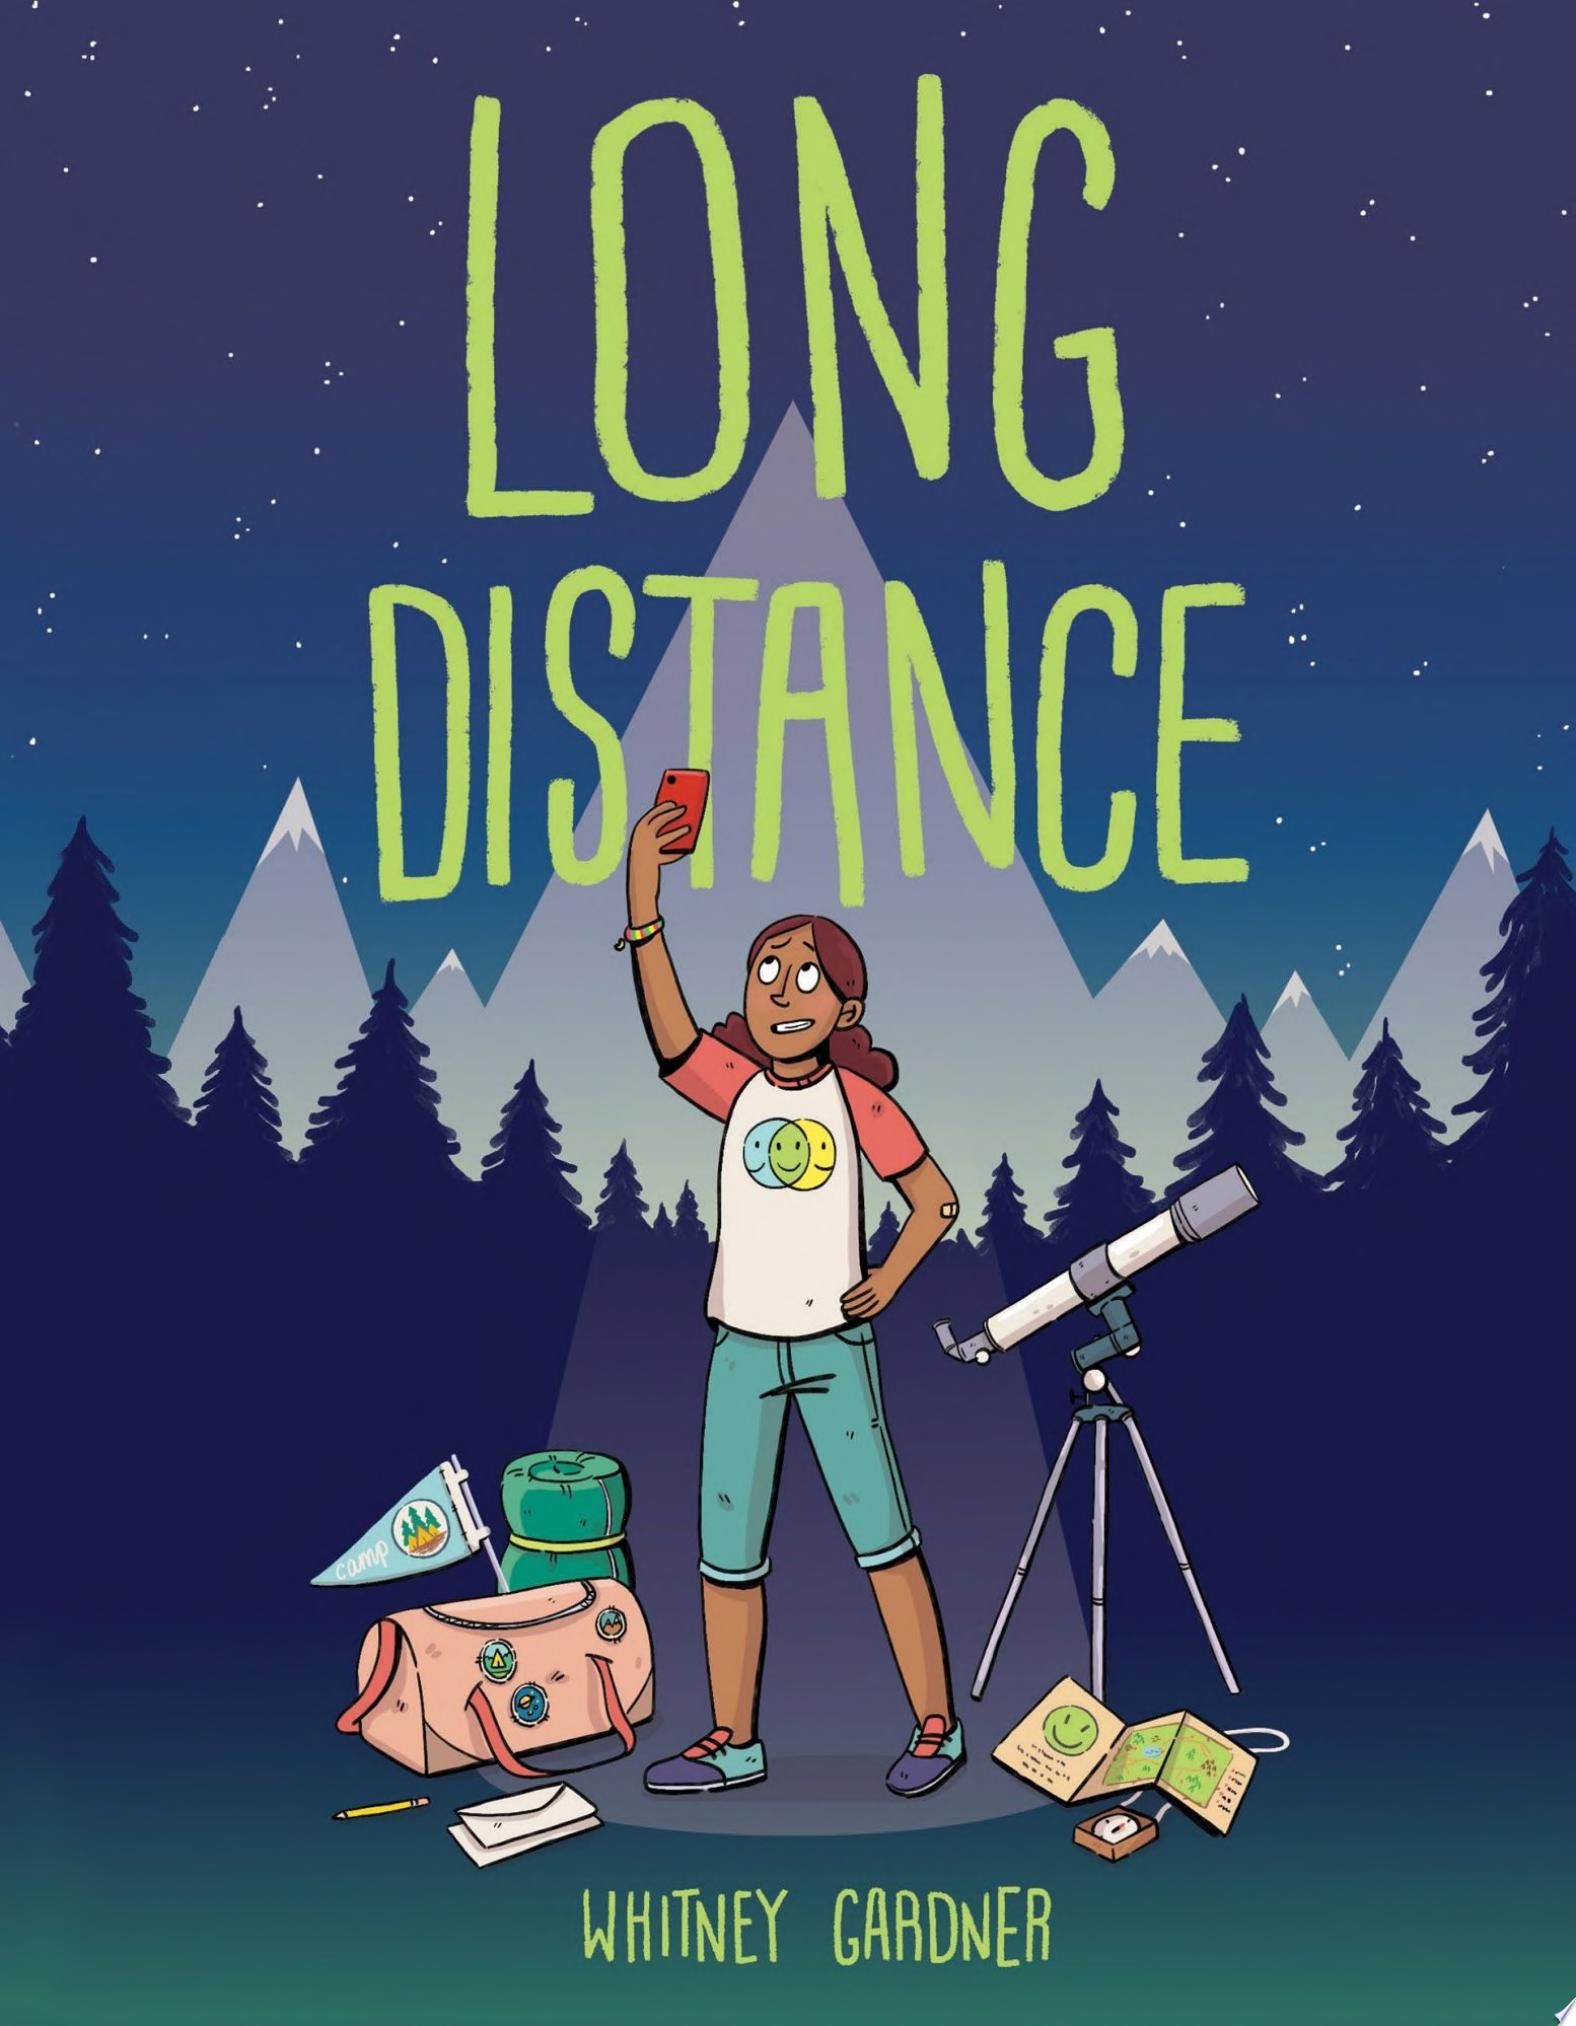 Image for "Long Distance"